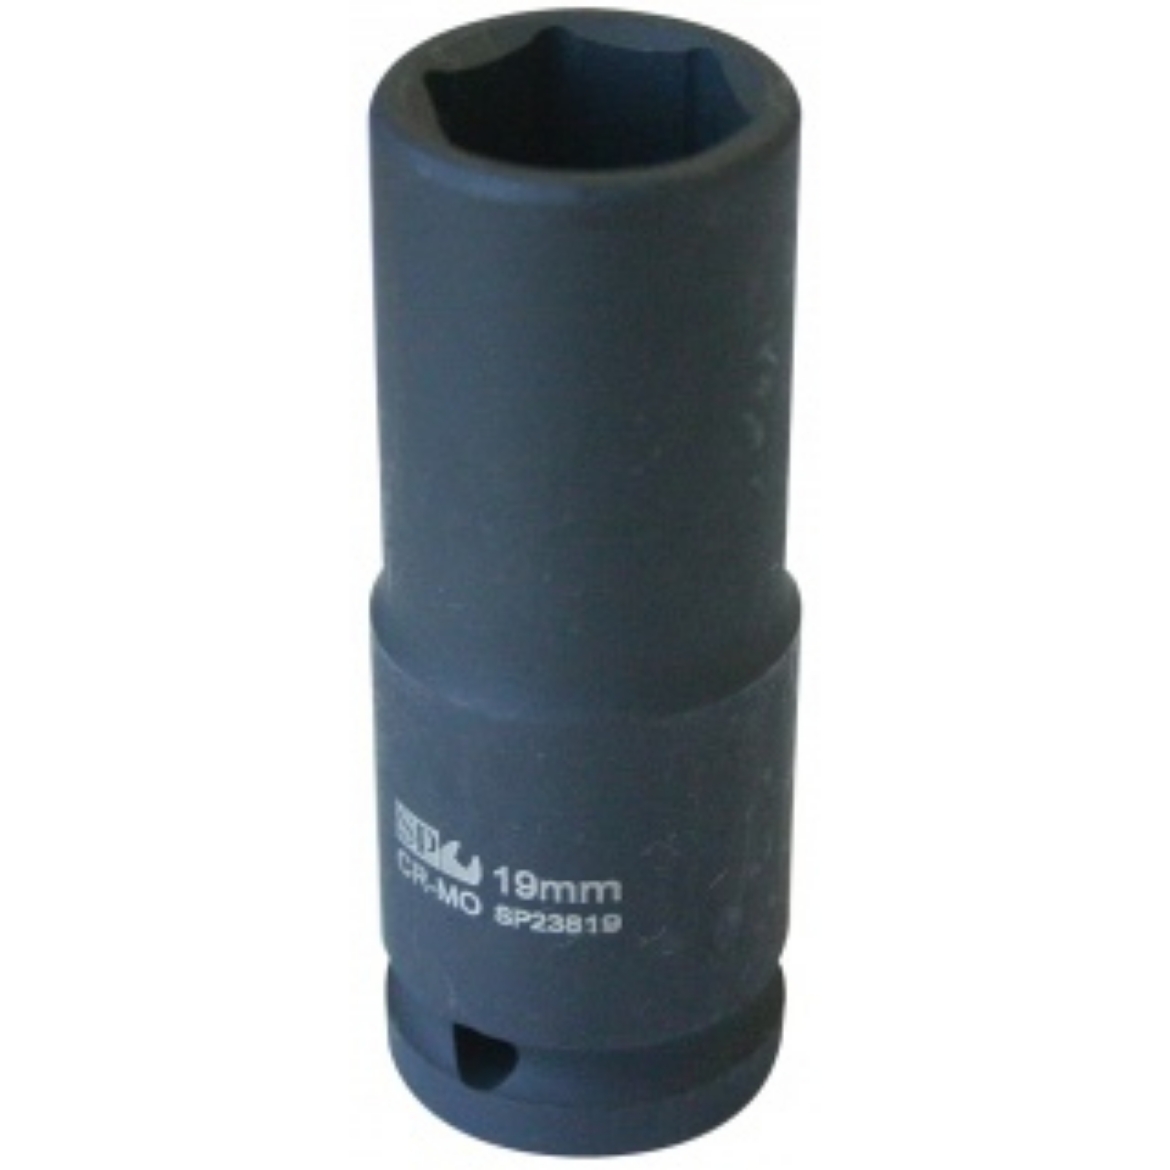 Picture of SOCKET IMPACT 1/2" DR 6PT DEEP METRIC 15MM SP TOOLS